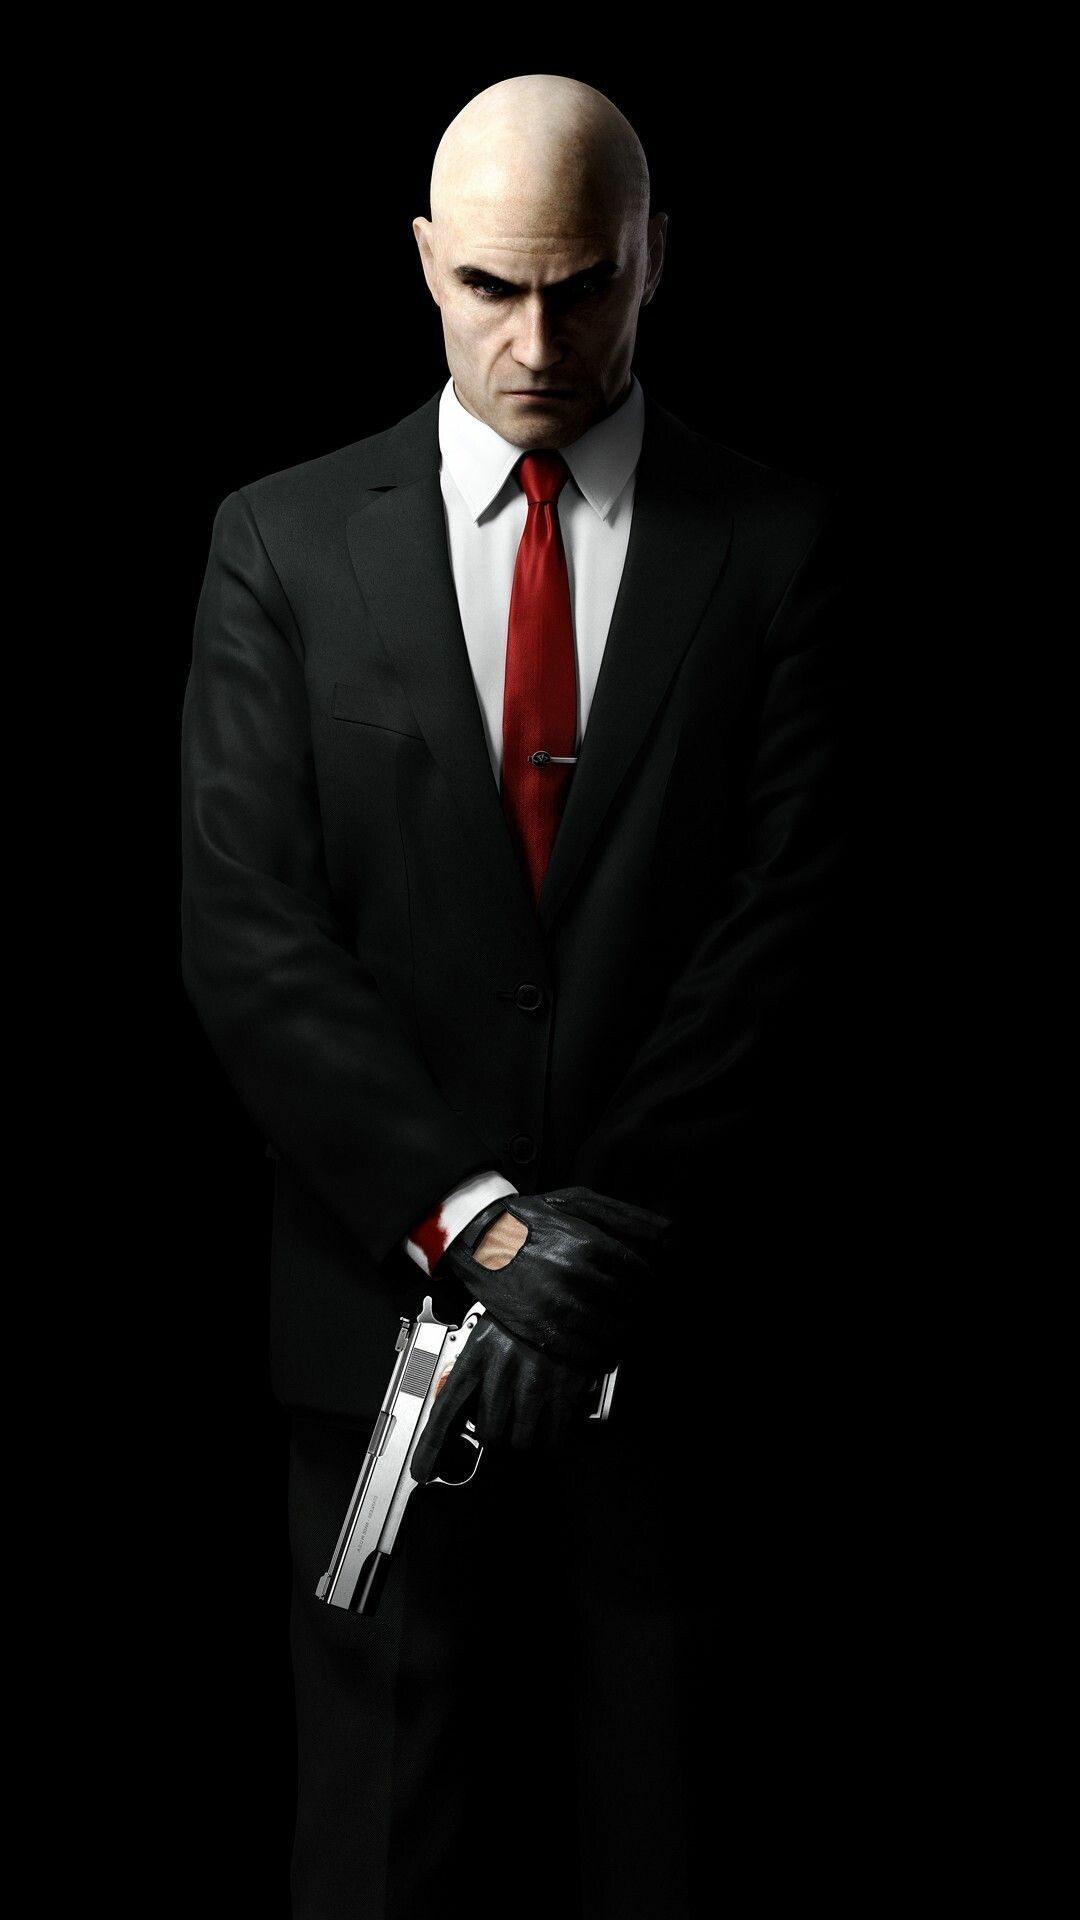 Hitman phone wallpapers, Stylish backgrounds, Sophisticated design, Game-inspired, 1080x1920 Full HD Phone